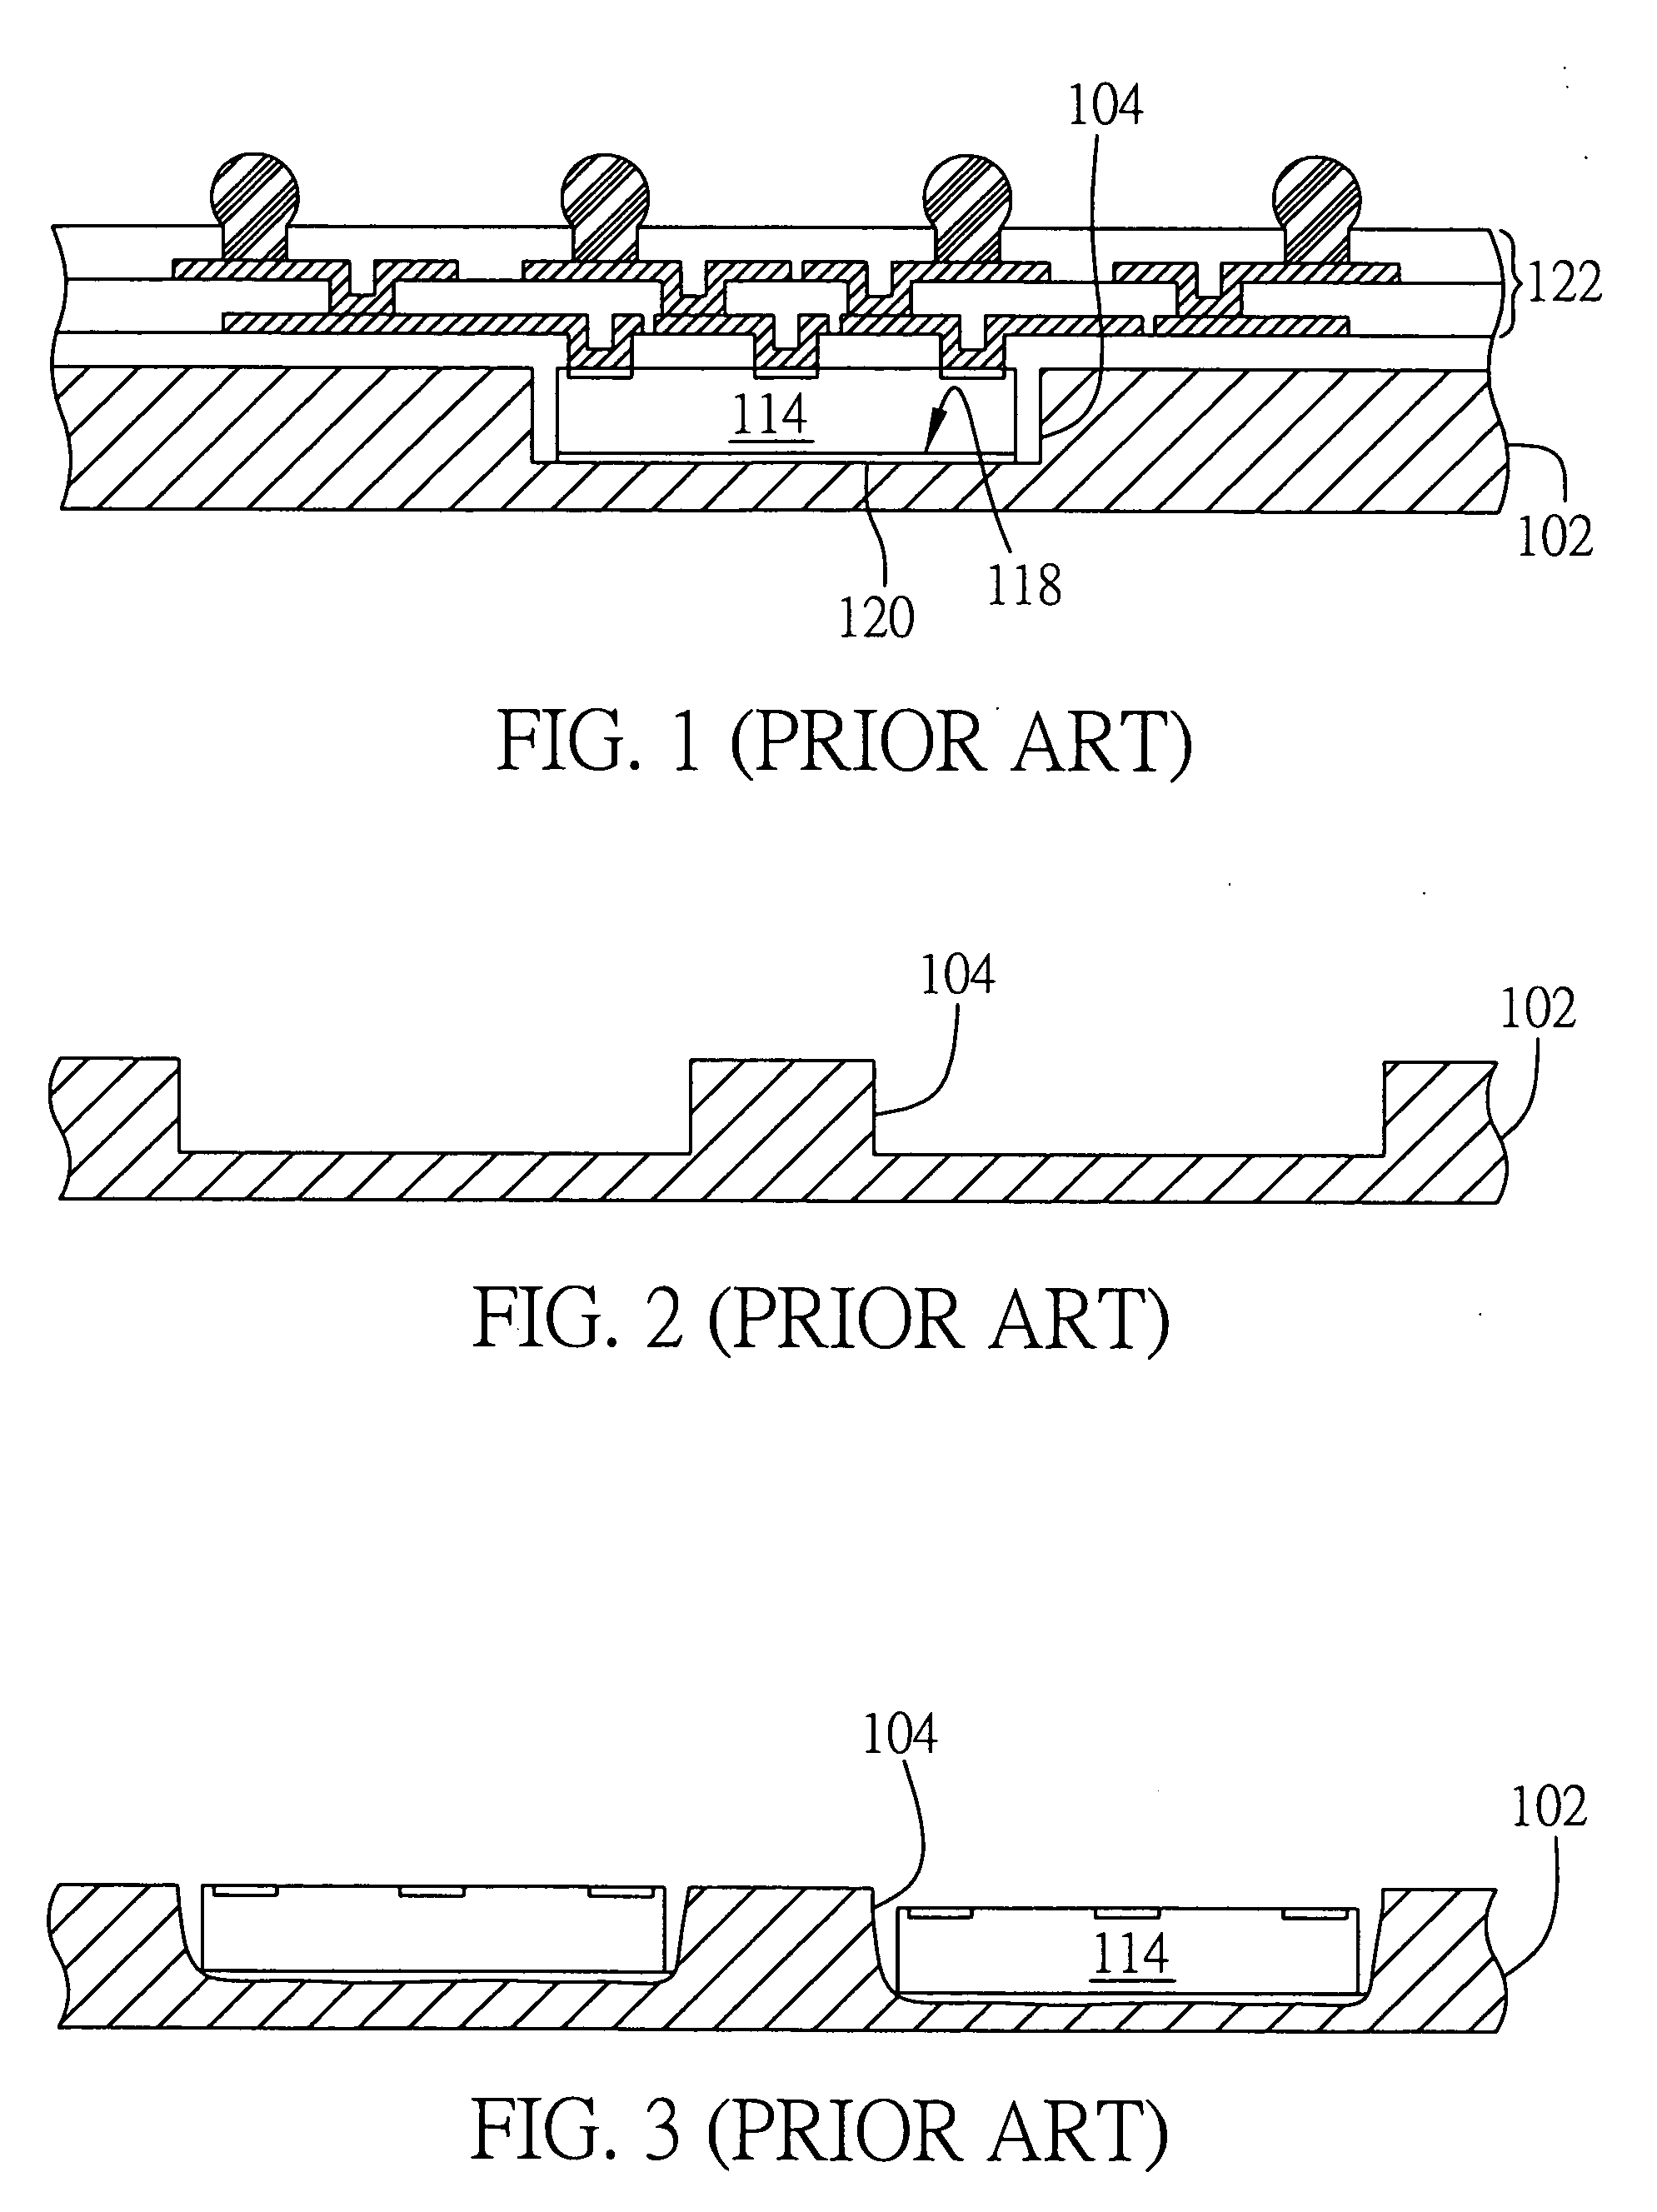 Substrate structure with embedded chip of semiconductor package and method for fabricating the same